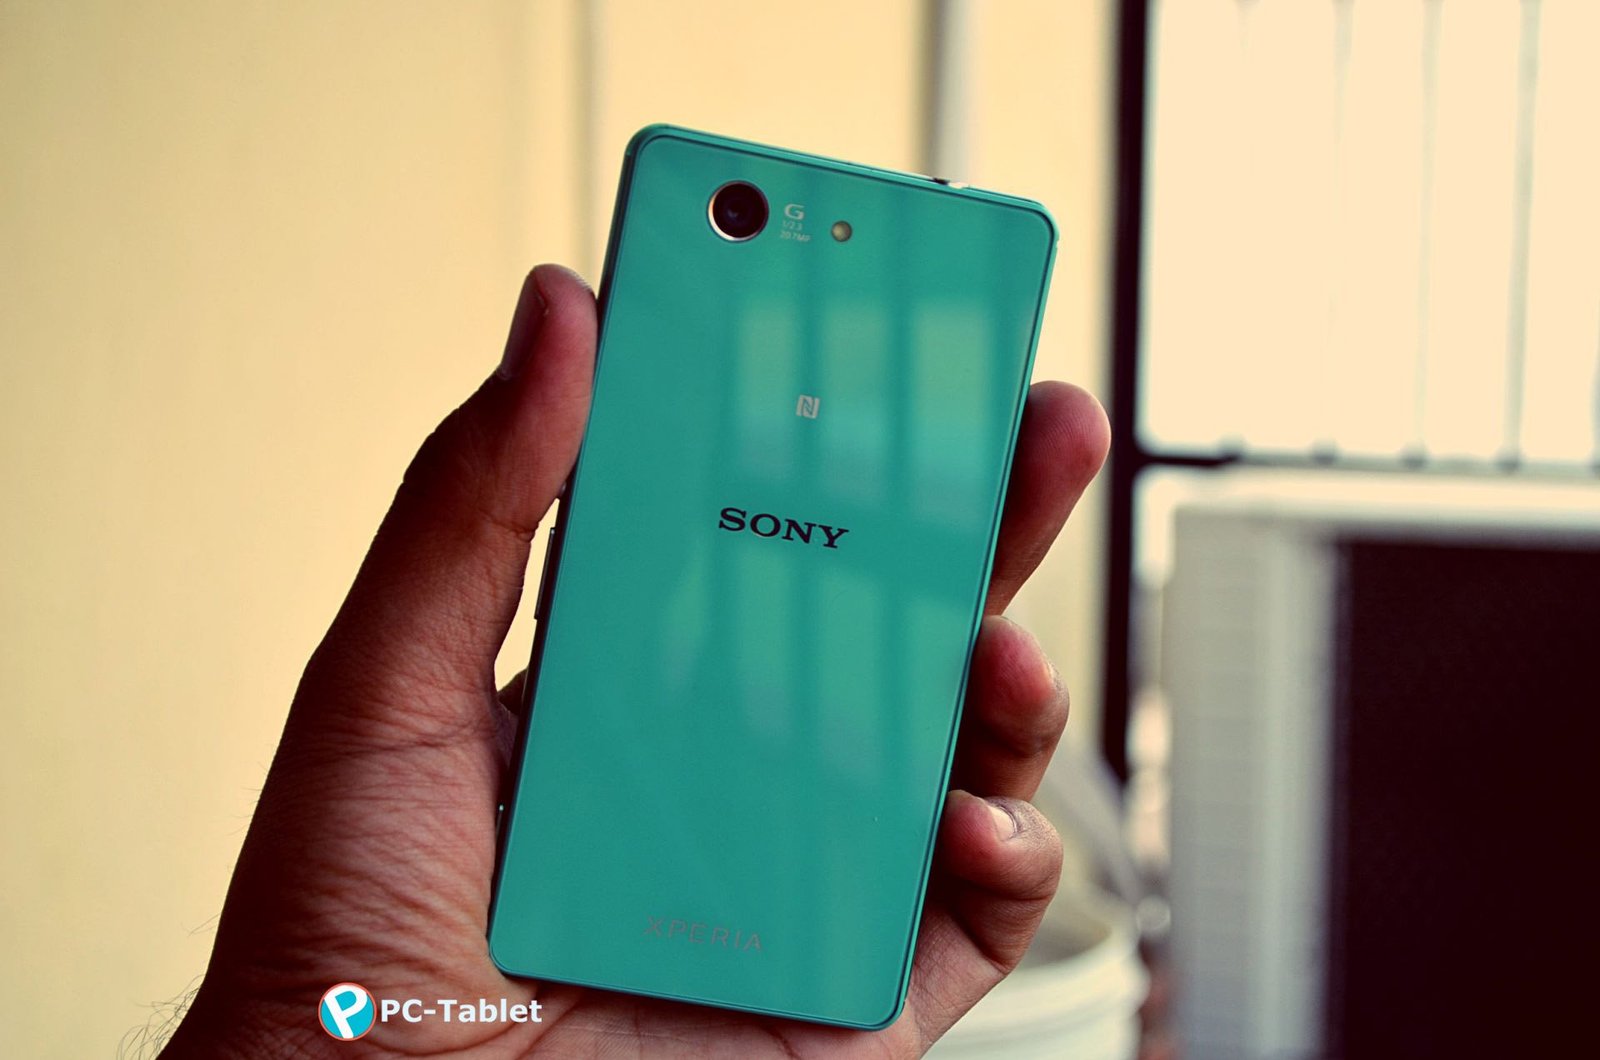 Sony Xperia Z3 pictures, official photos